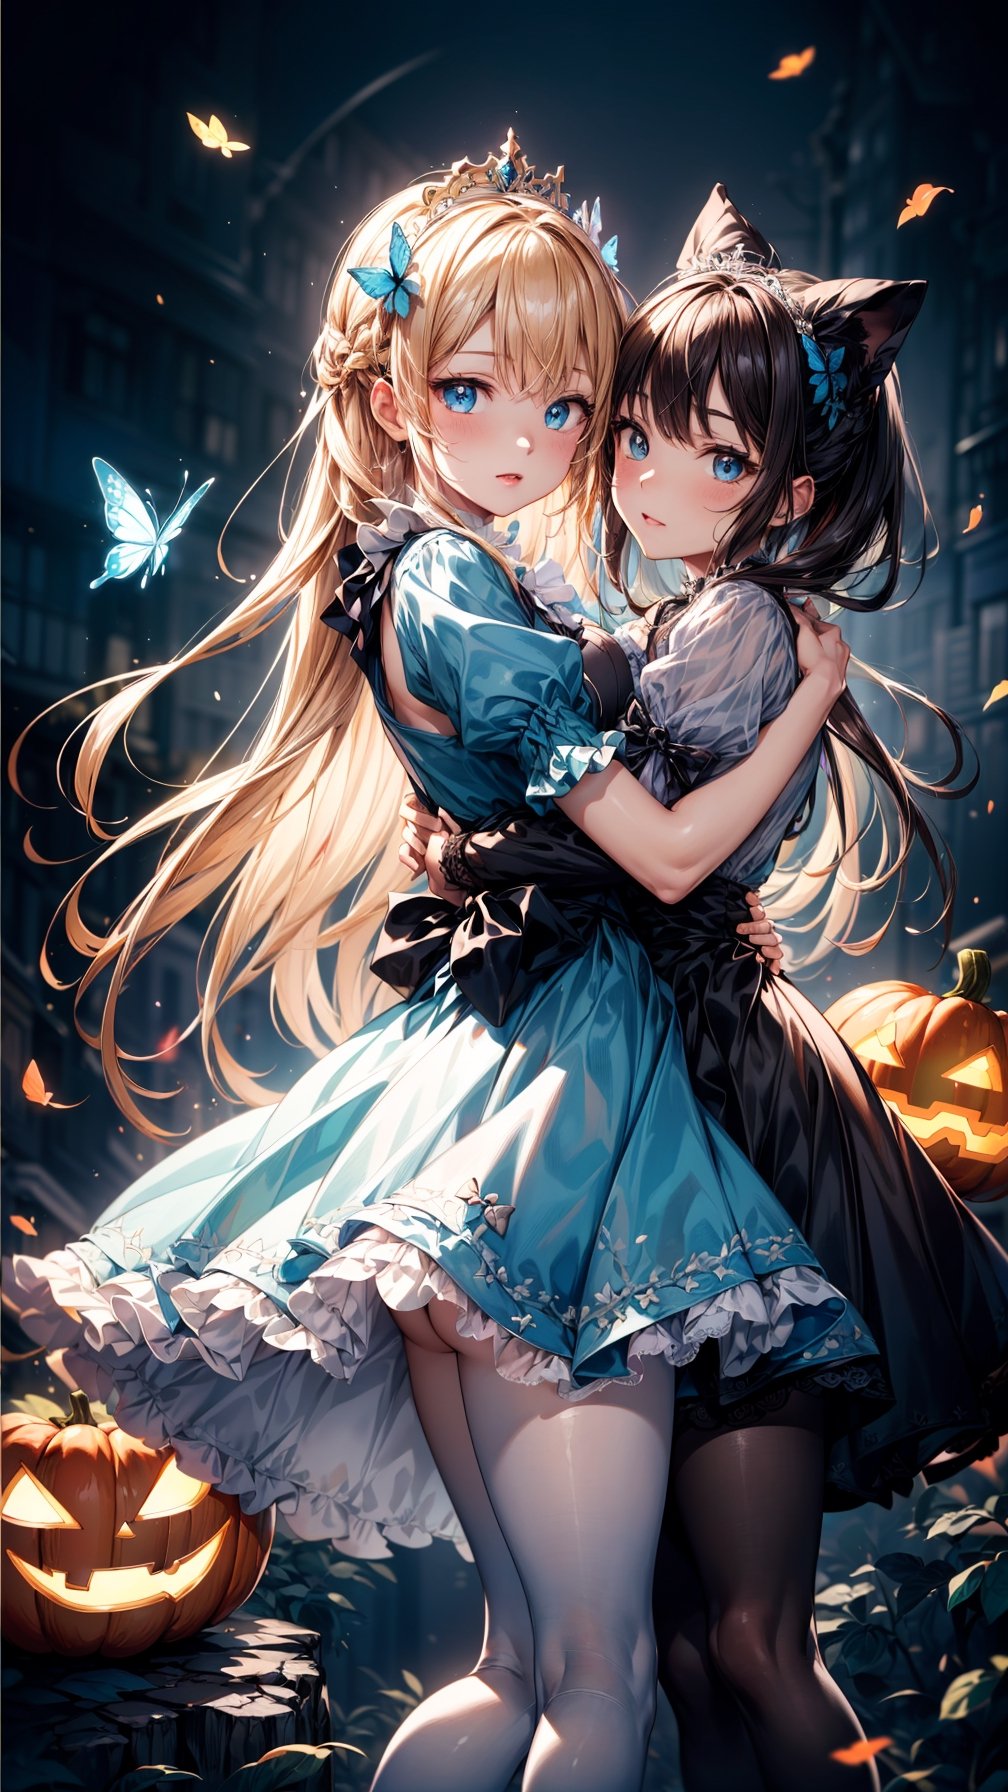 (best quality, masterpiece, illustration, designer, lighting), (extremely detailed CG 8k wallpaper unit), (detailed and expressive eyes), detailed particles, beautiful lighting, a cute girl, long blonde hair, wearing a teddy bear tiara, (Hug  glowing jack-o'-lantern),donning a beautiful blue and white dress with ruffles and lace, sheer pink stockings, transparent aquamarine crystal shoes, bows around her waist (Alice in Wonderland), butterflies around, (Pixiv anime style), (Wit studios),(manga style), 